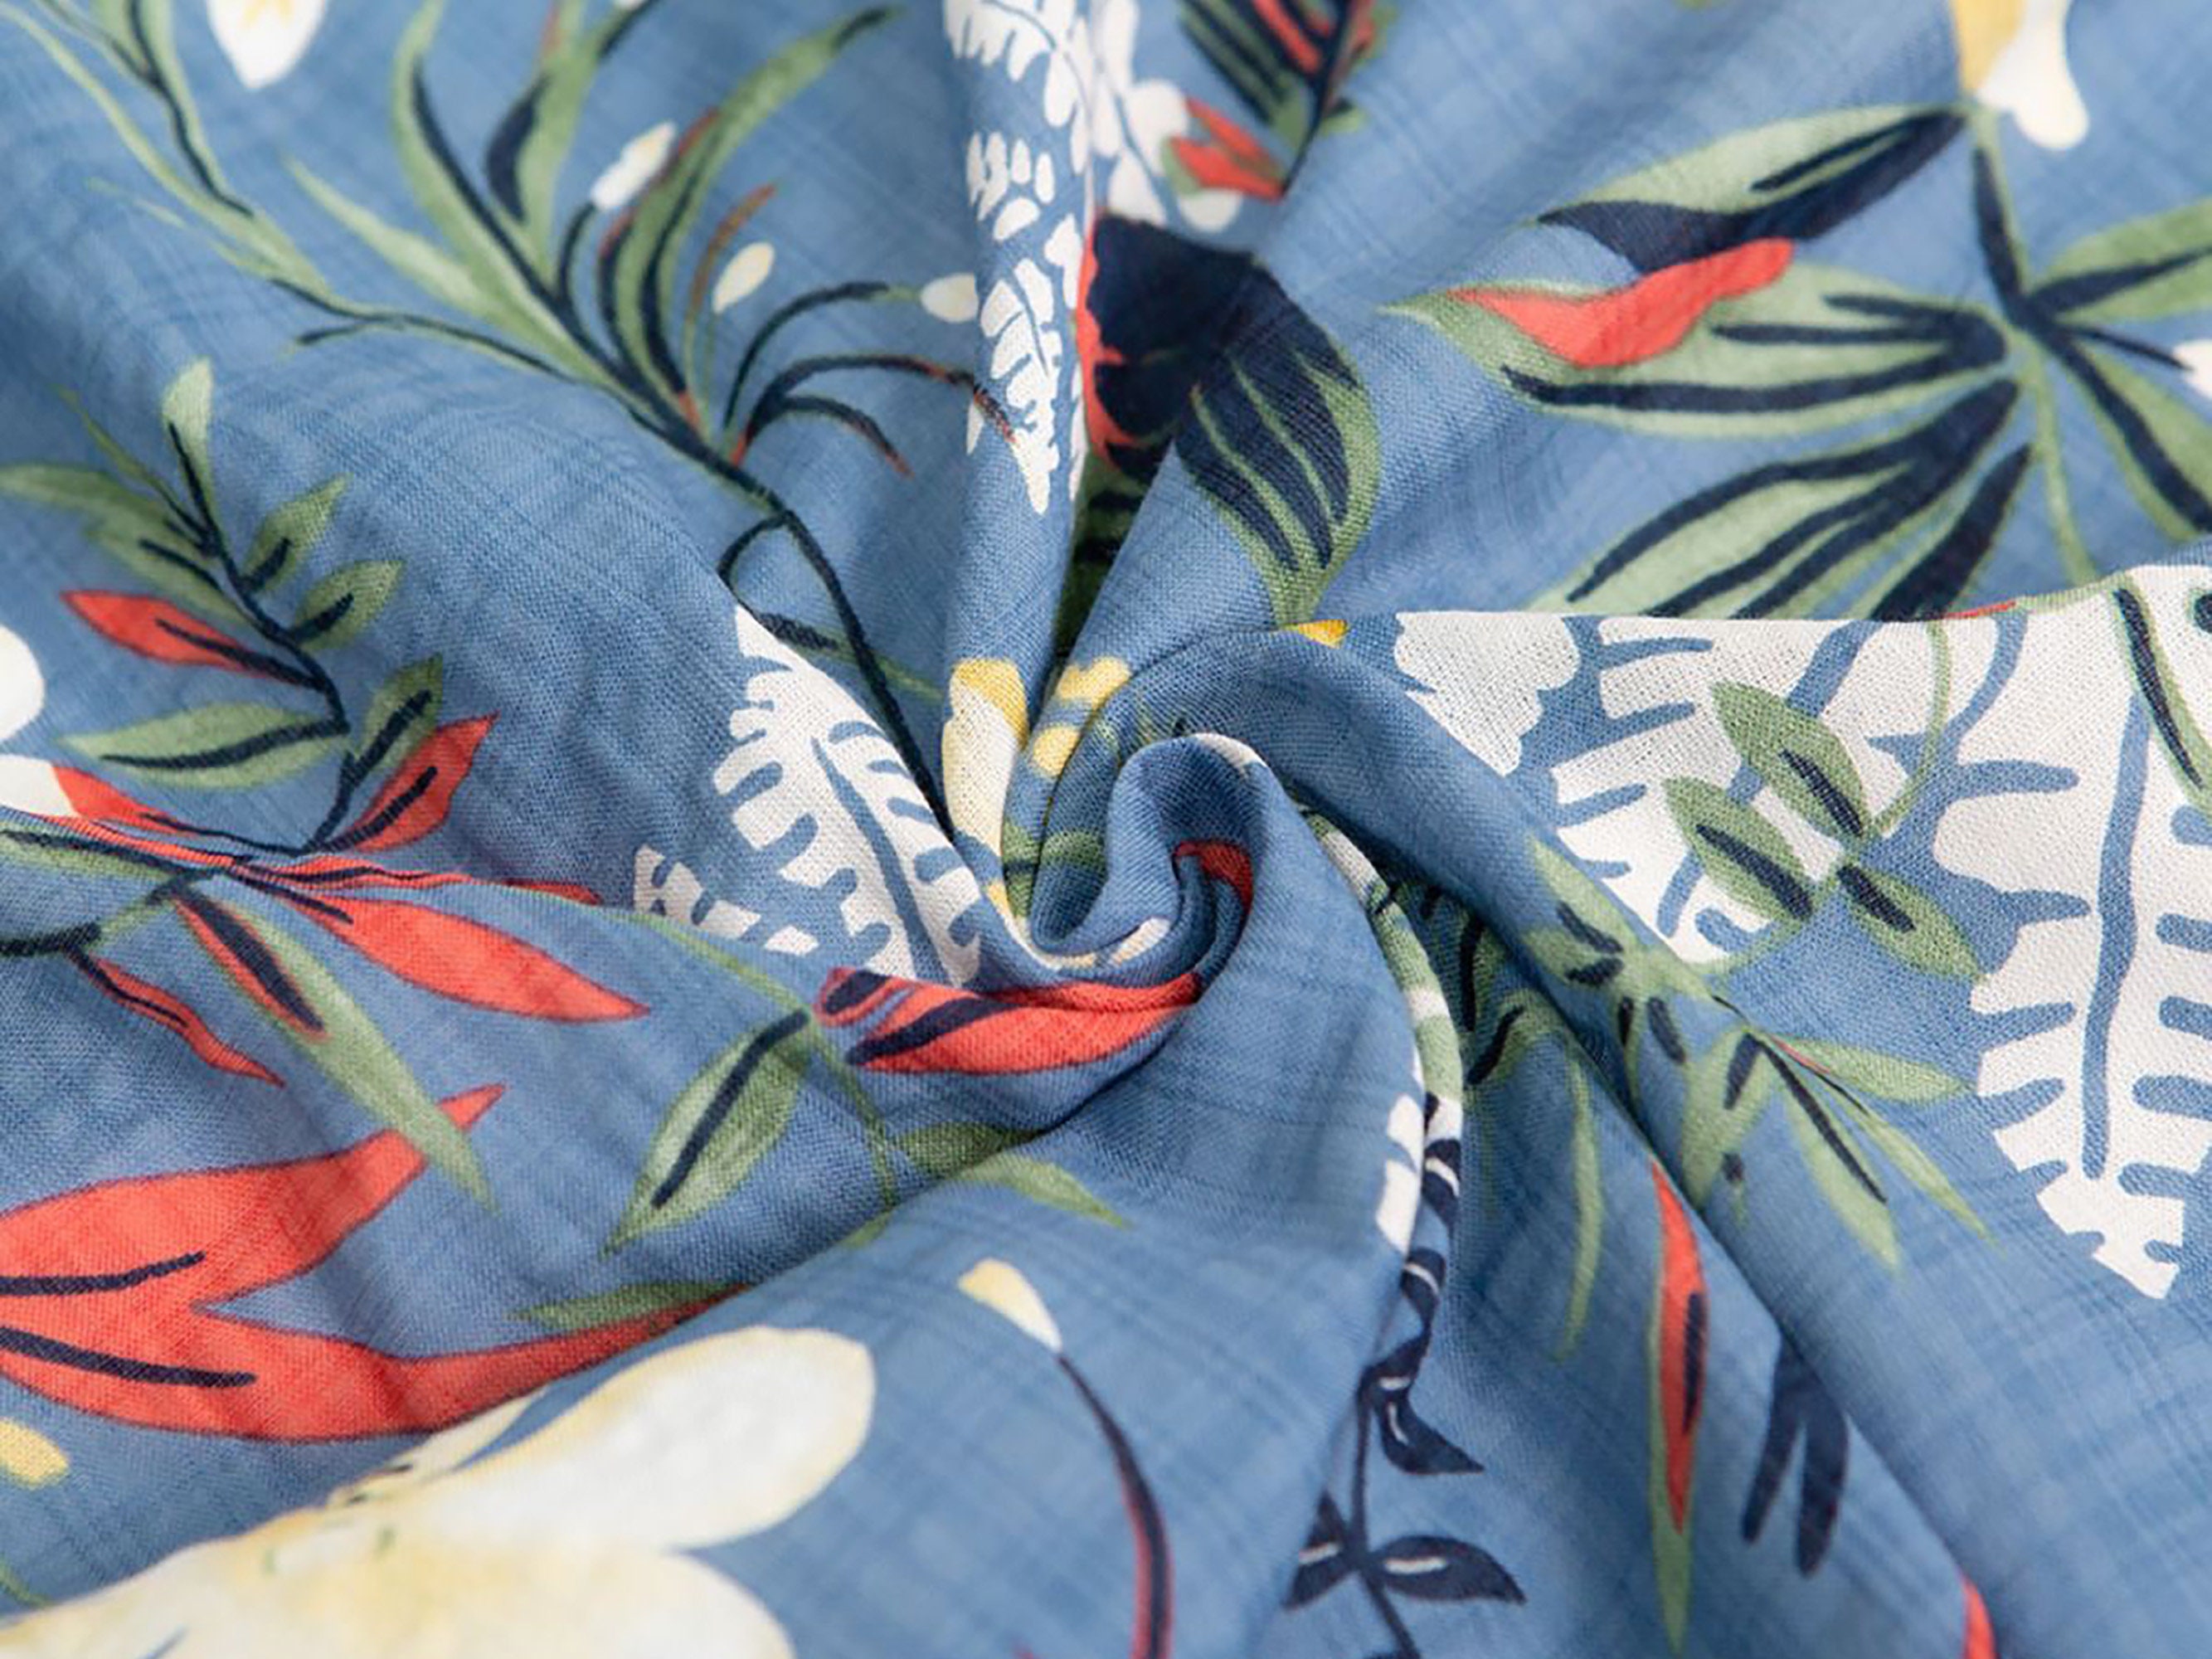 Waikiki Cotton Rayon Fabric by the Yard 3 Colors Made in - Etsy